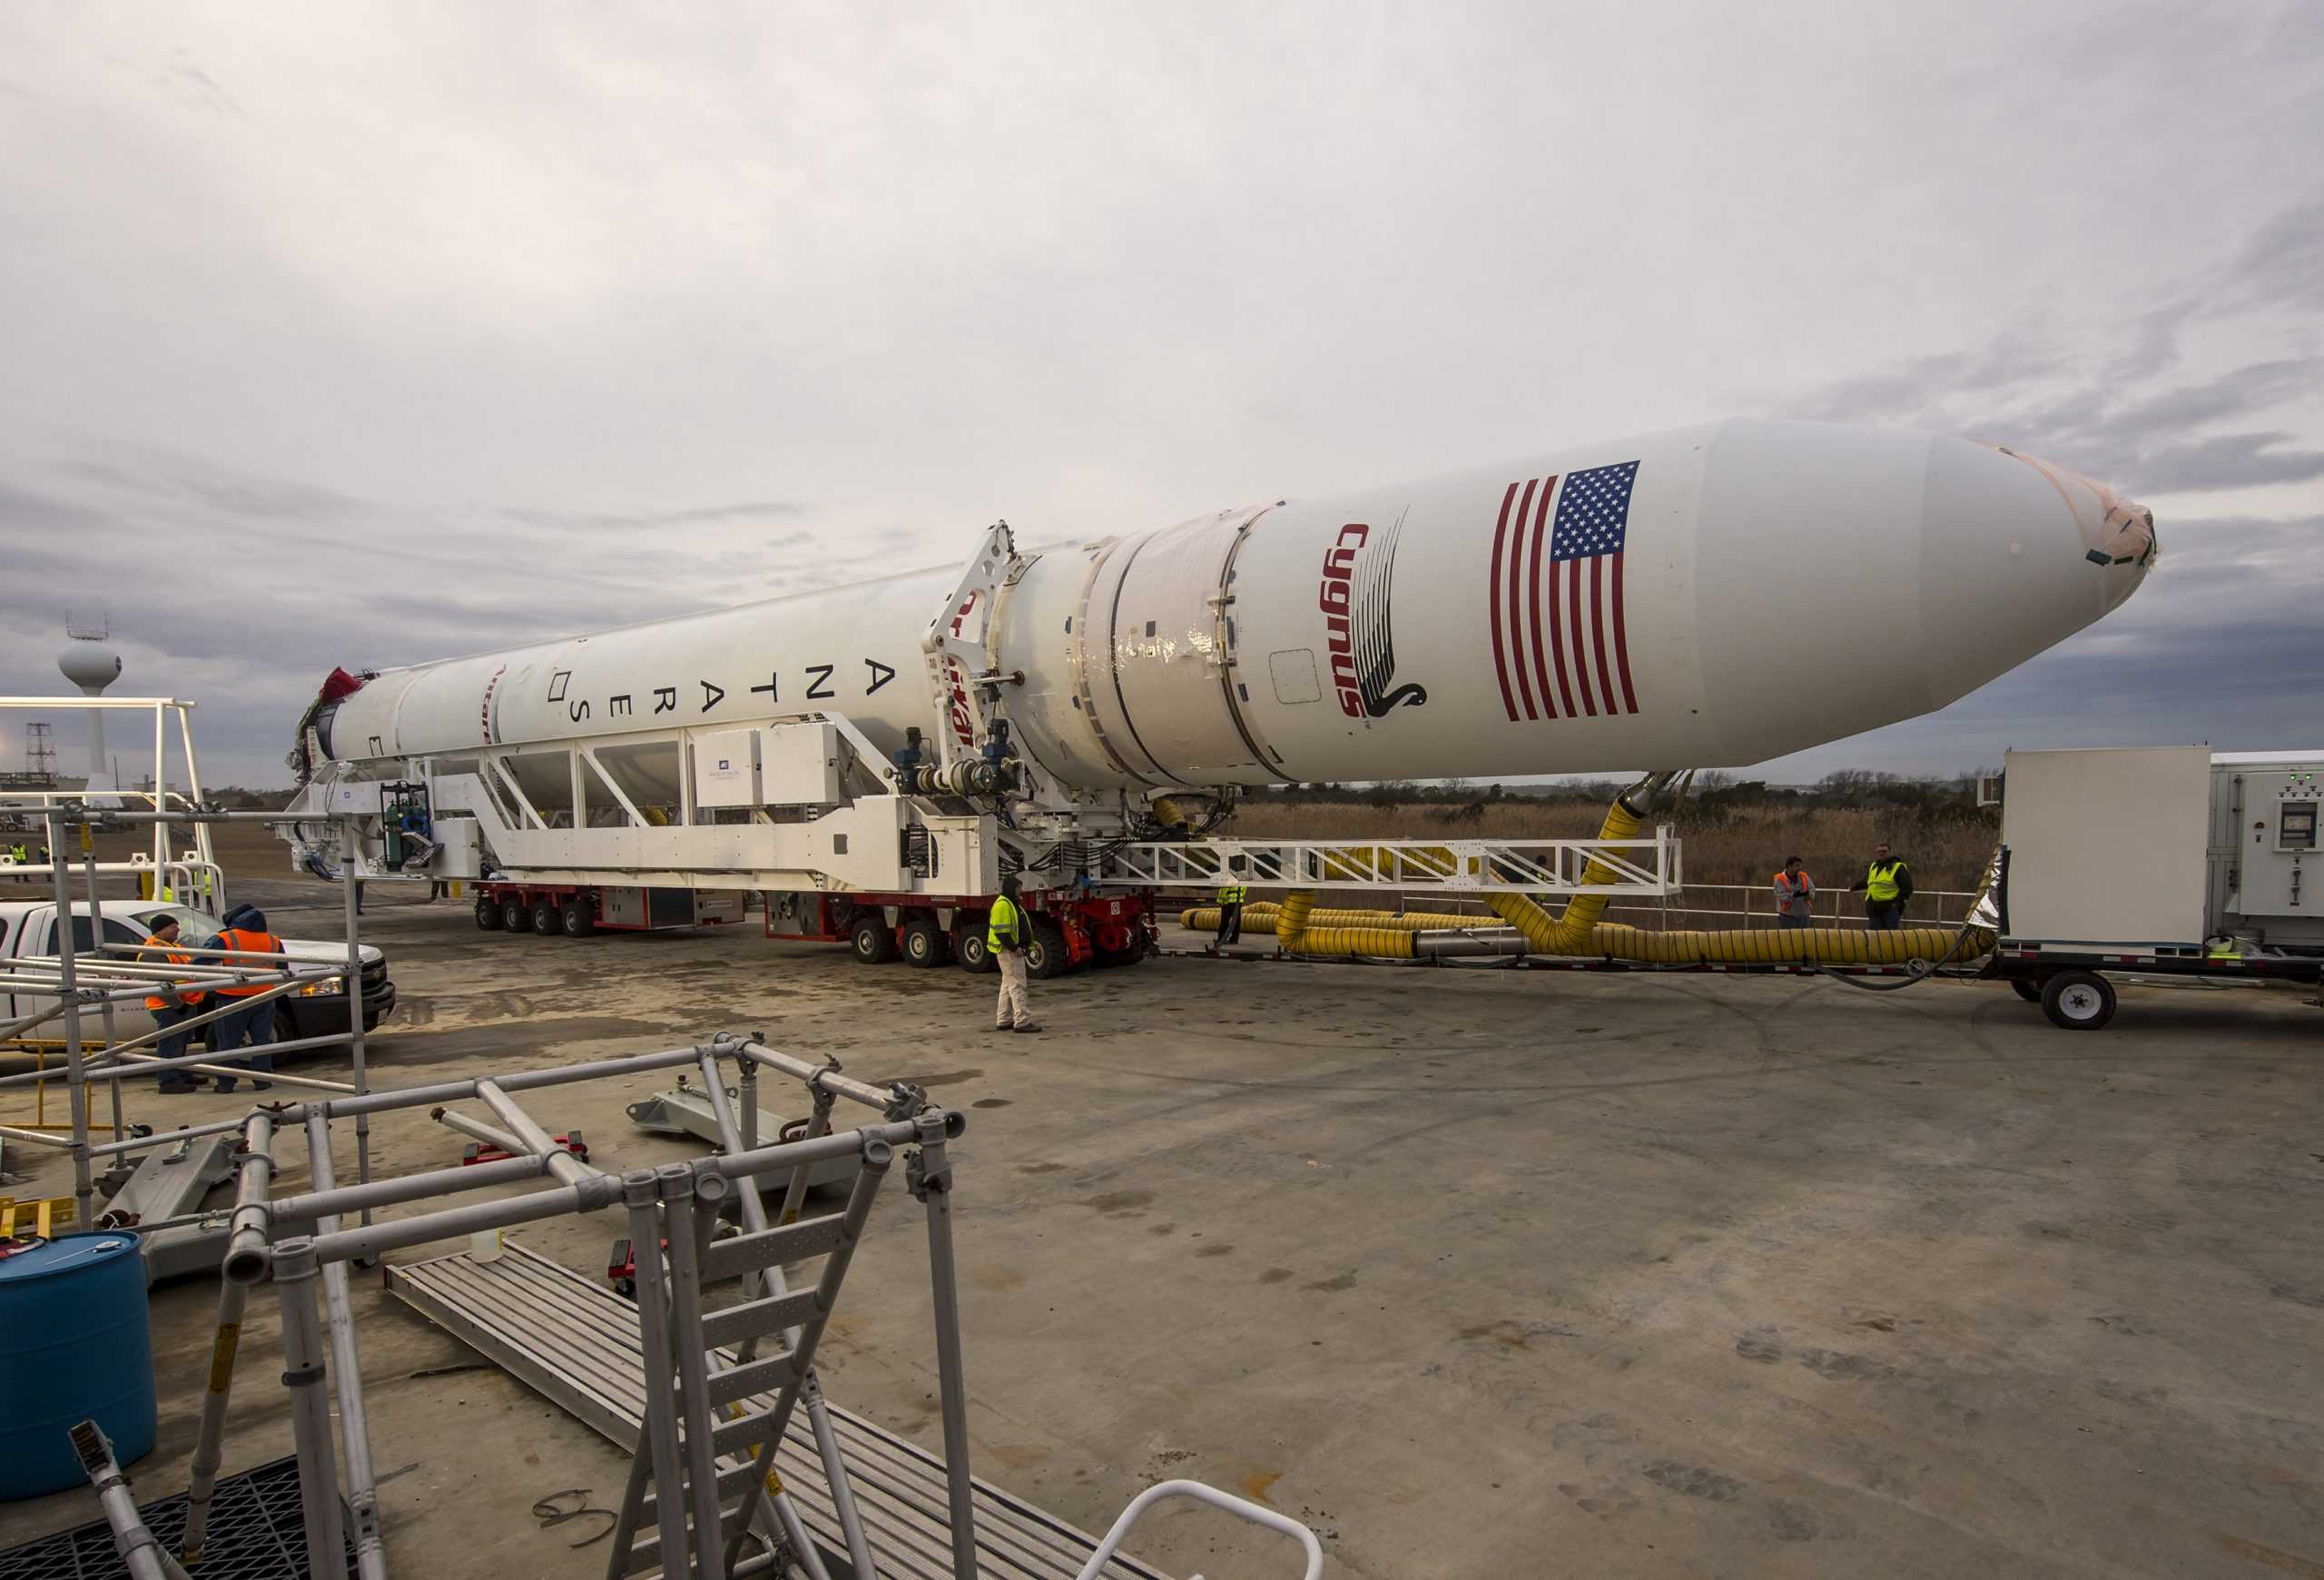 An Orbital Sciences Corporation Antares rocket is seen as it is rolled out to launch Pad-0A in this handout picture taken at NASA's Wallops Flight Facility, January 5, 2014. The Antares is planned to launch a Cygnus spacecraft on a cargo resupply mission to the International Space Station January 8.   REUTERS/NASA/Bill Ingalls/Handout  (UNITED STATES - Tags: SCIENCE TECHNOLOGY) THIS IMAGE HAS BEEN SUPPLIED BY A THIRD PARTY. IT IS DISTRIBUTED, EXACTLY AS RECEIVED BY REUTERS, AS A SERVICE TO CLIENTS. FOR EDITORIAL USE ONLY. NOT FOR SALE FOR MARKETING OR ADVERTISING CAMPAIGNS - RTX173GC